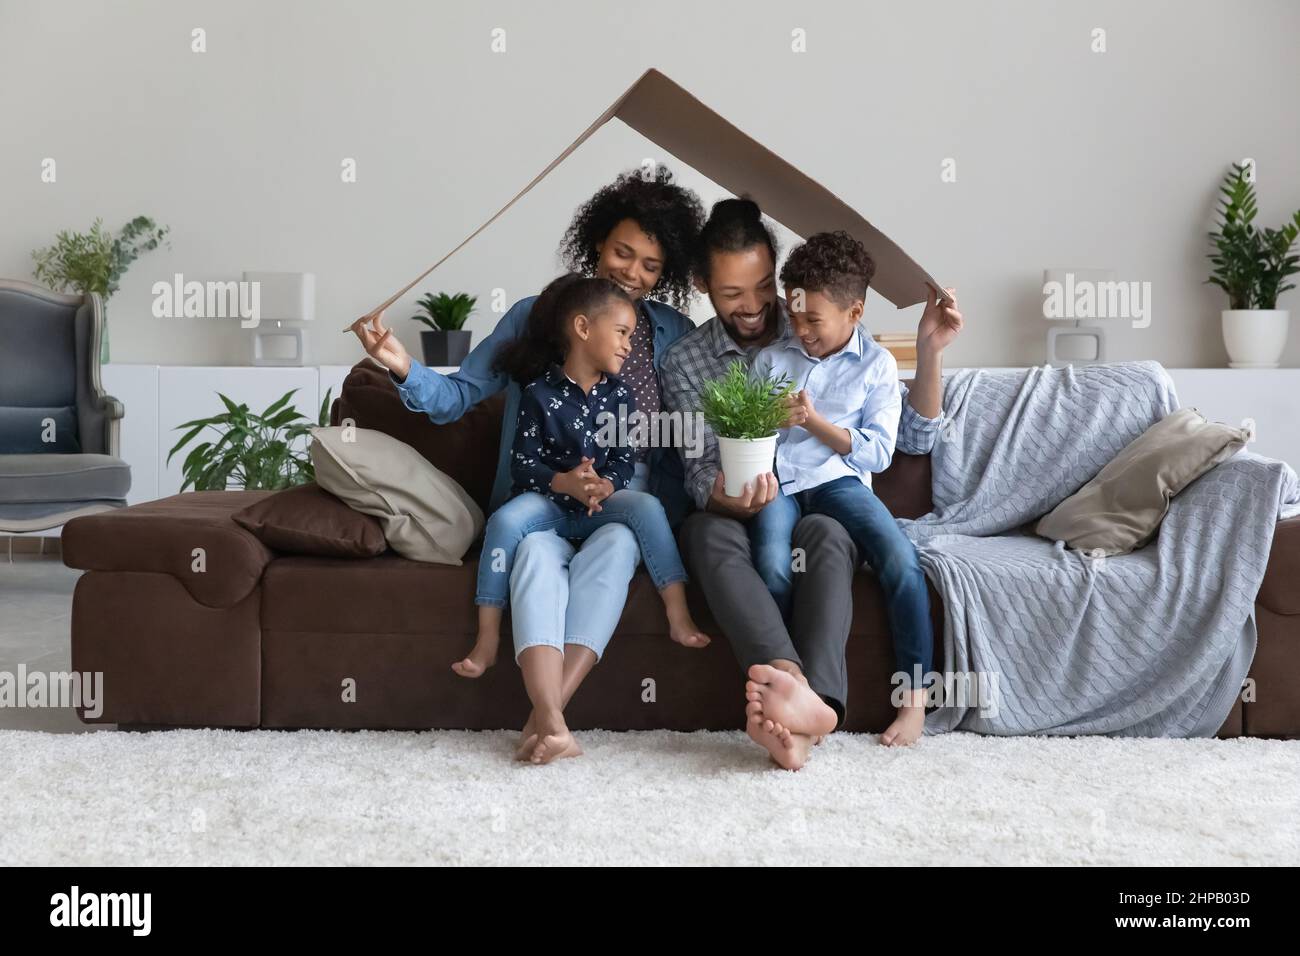 Happy bonding African American family celebrating moving into new home. Stock Photo